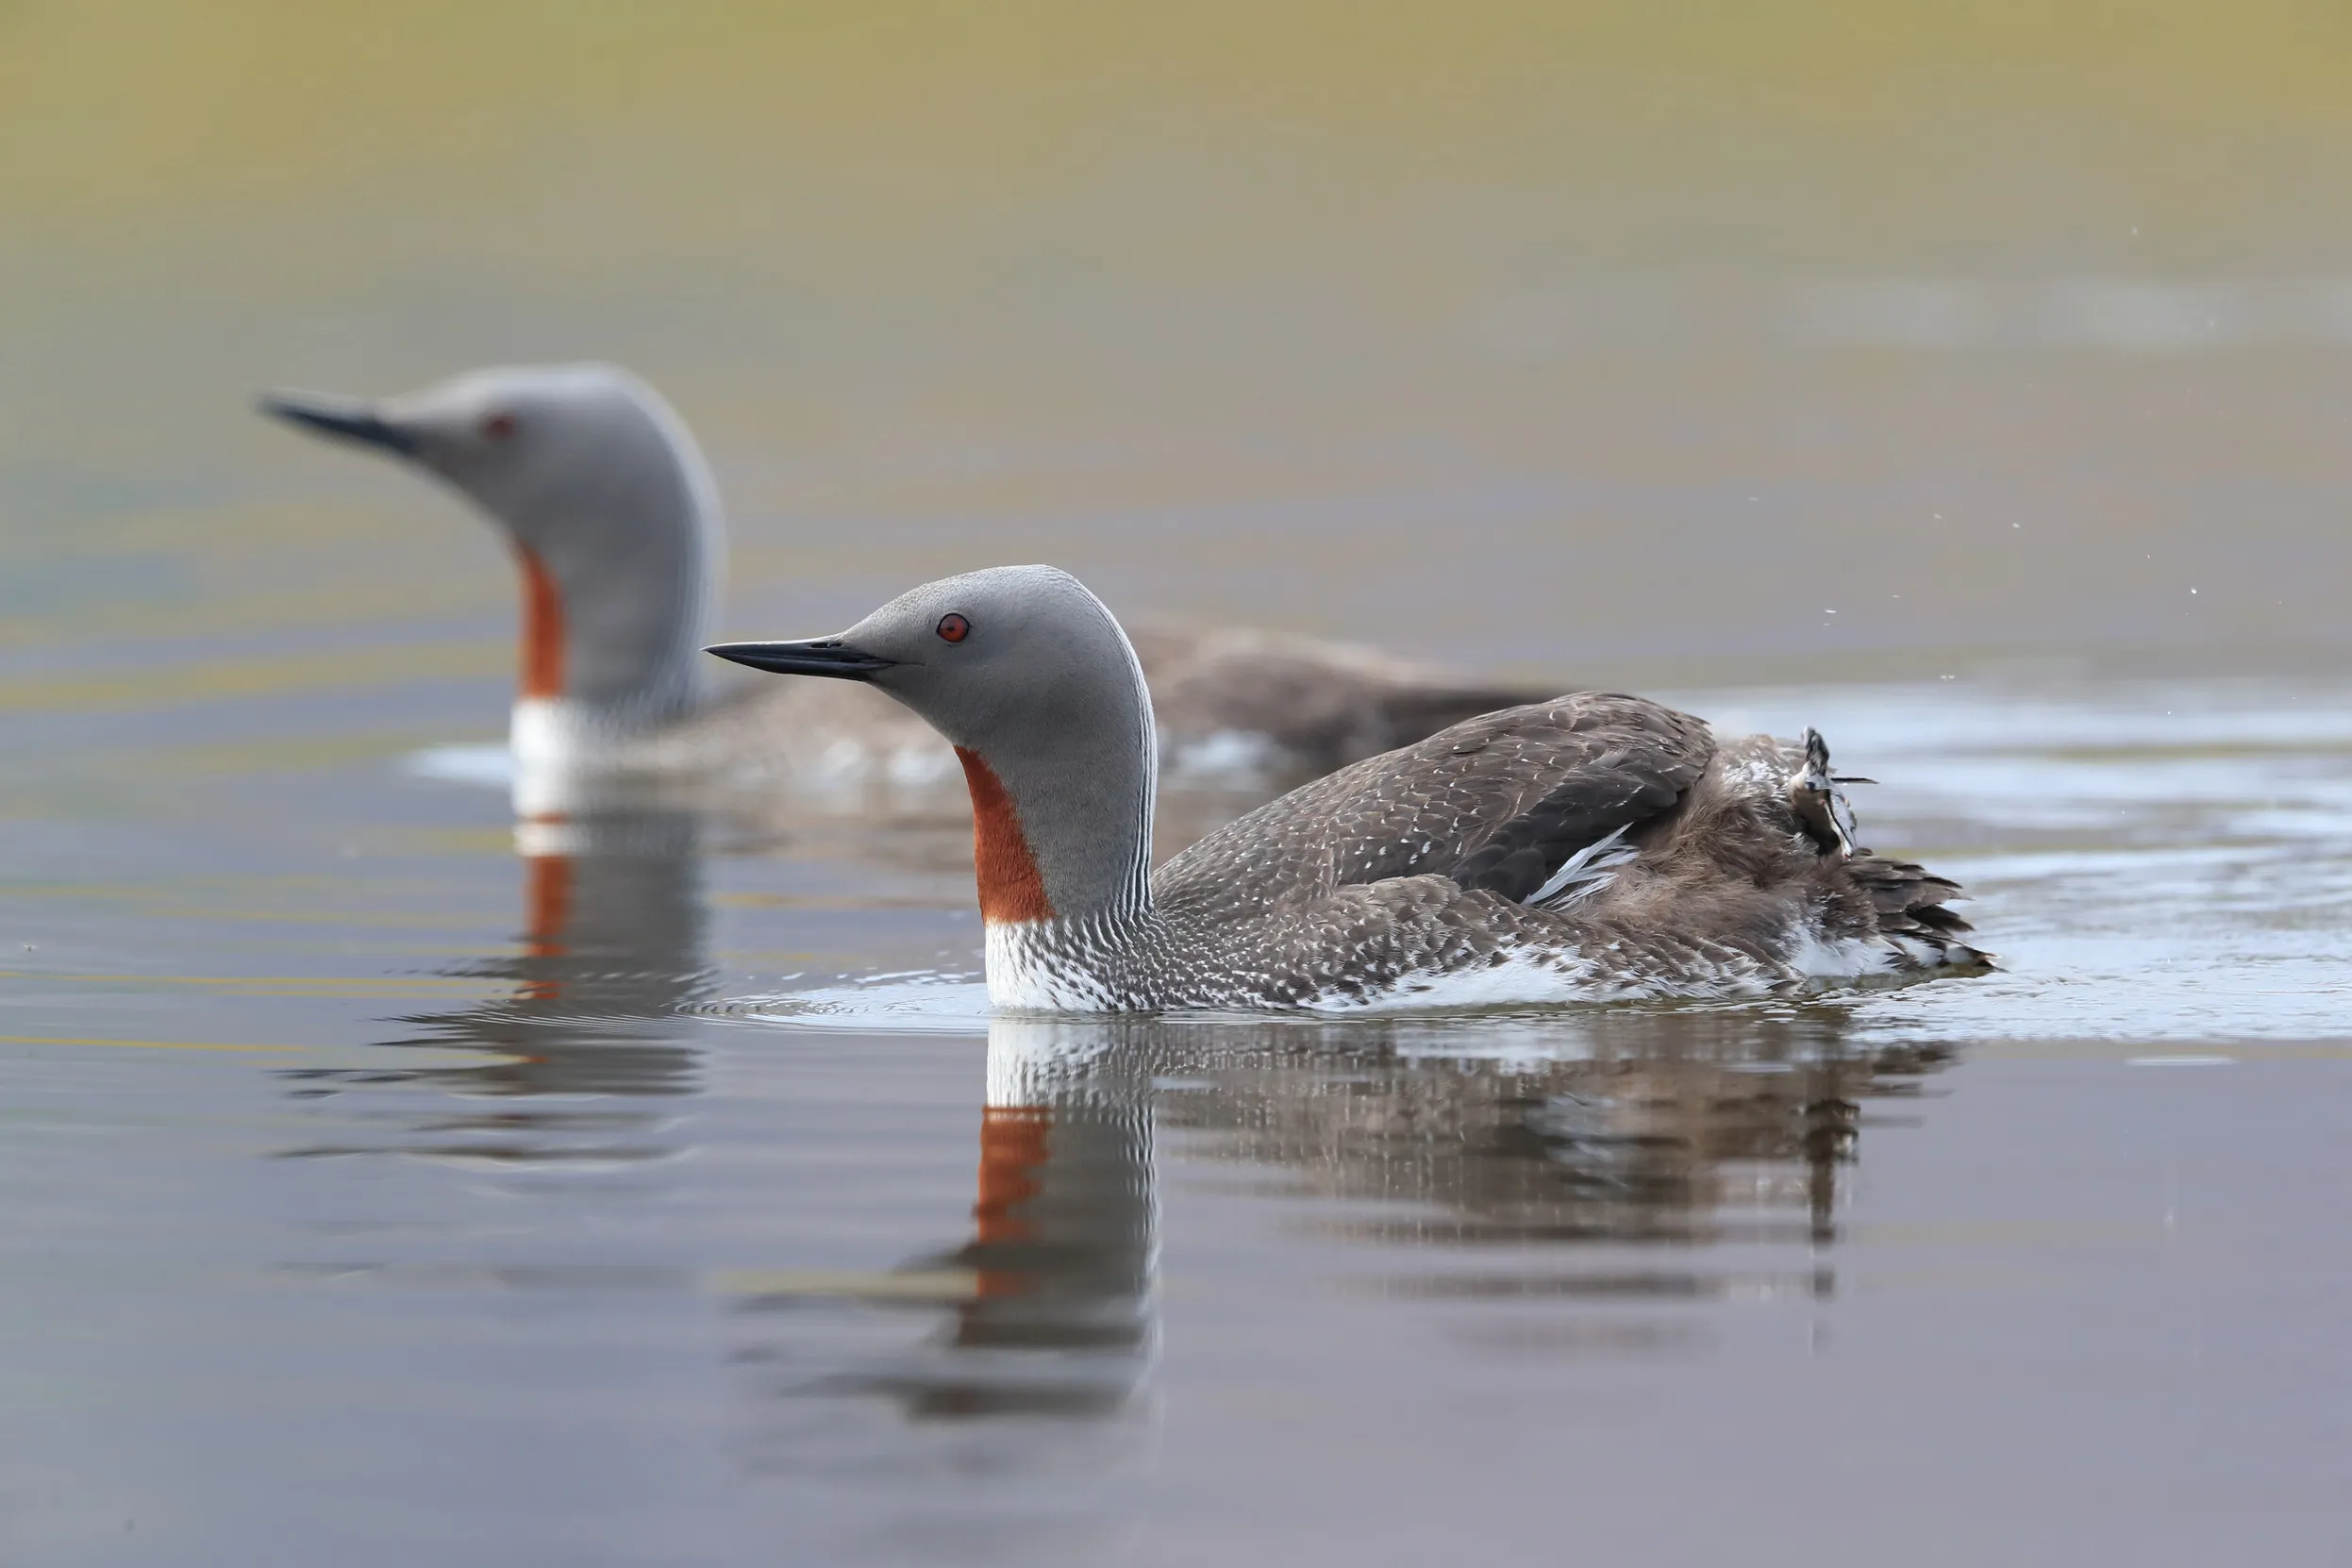 Two sleek birds with grey, orange and mottled brown plumage, paddling through calm water.